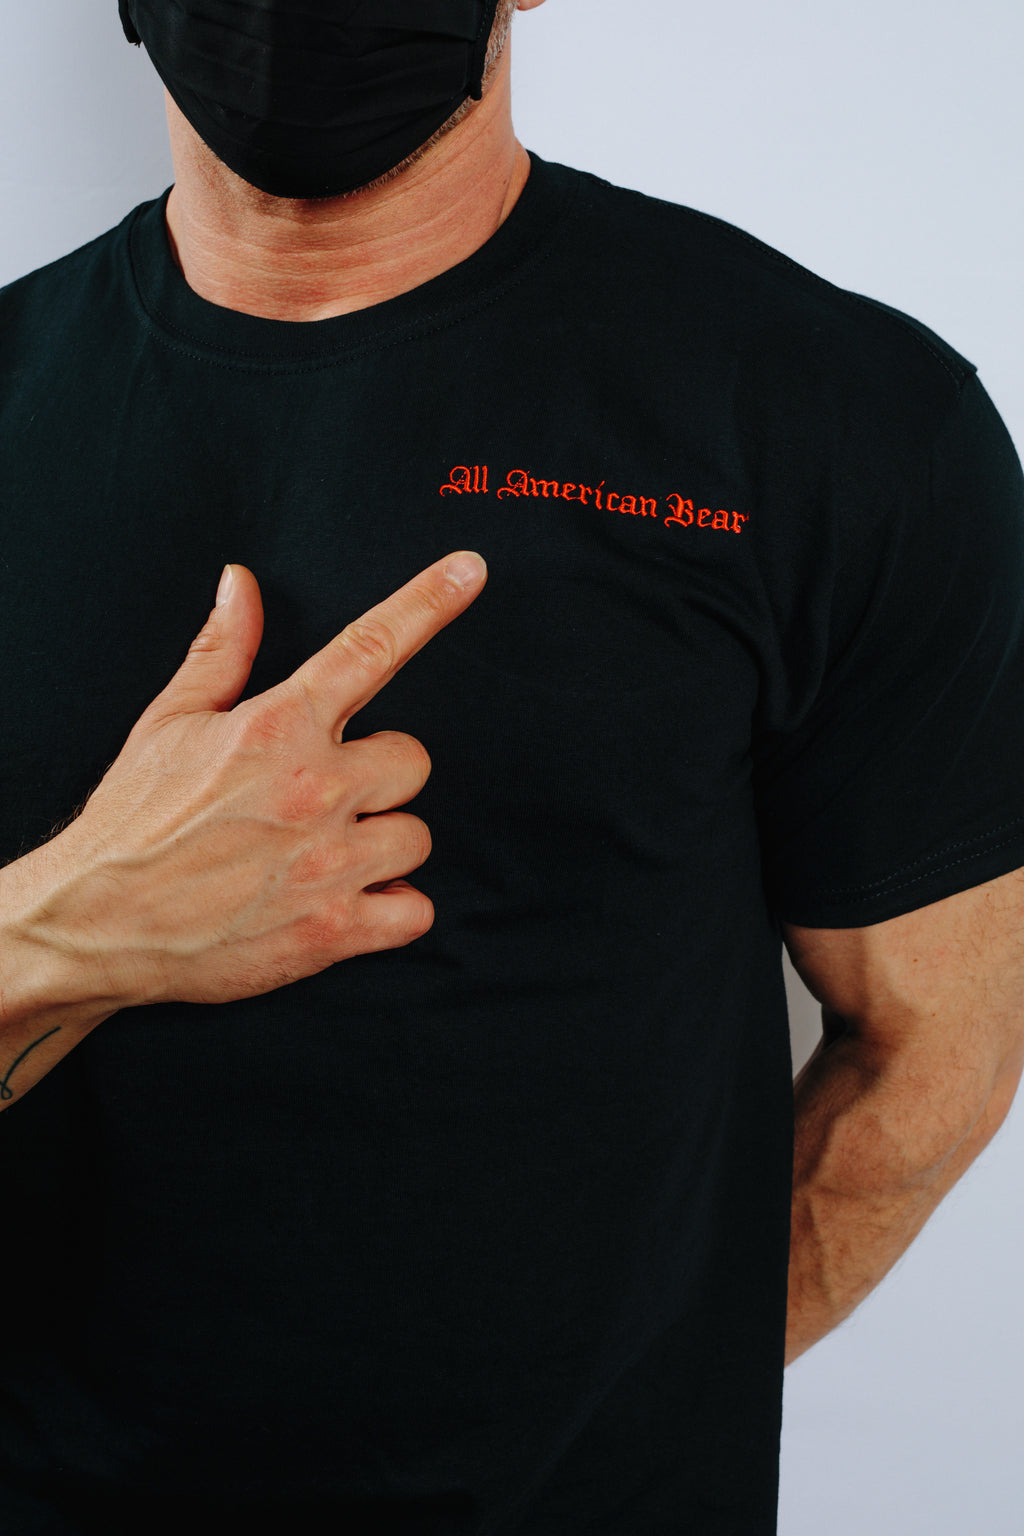 All American Bear T-Shirt (Available in Black or White)